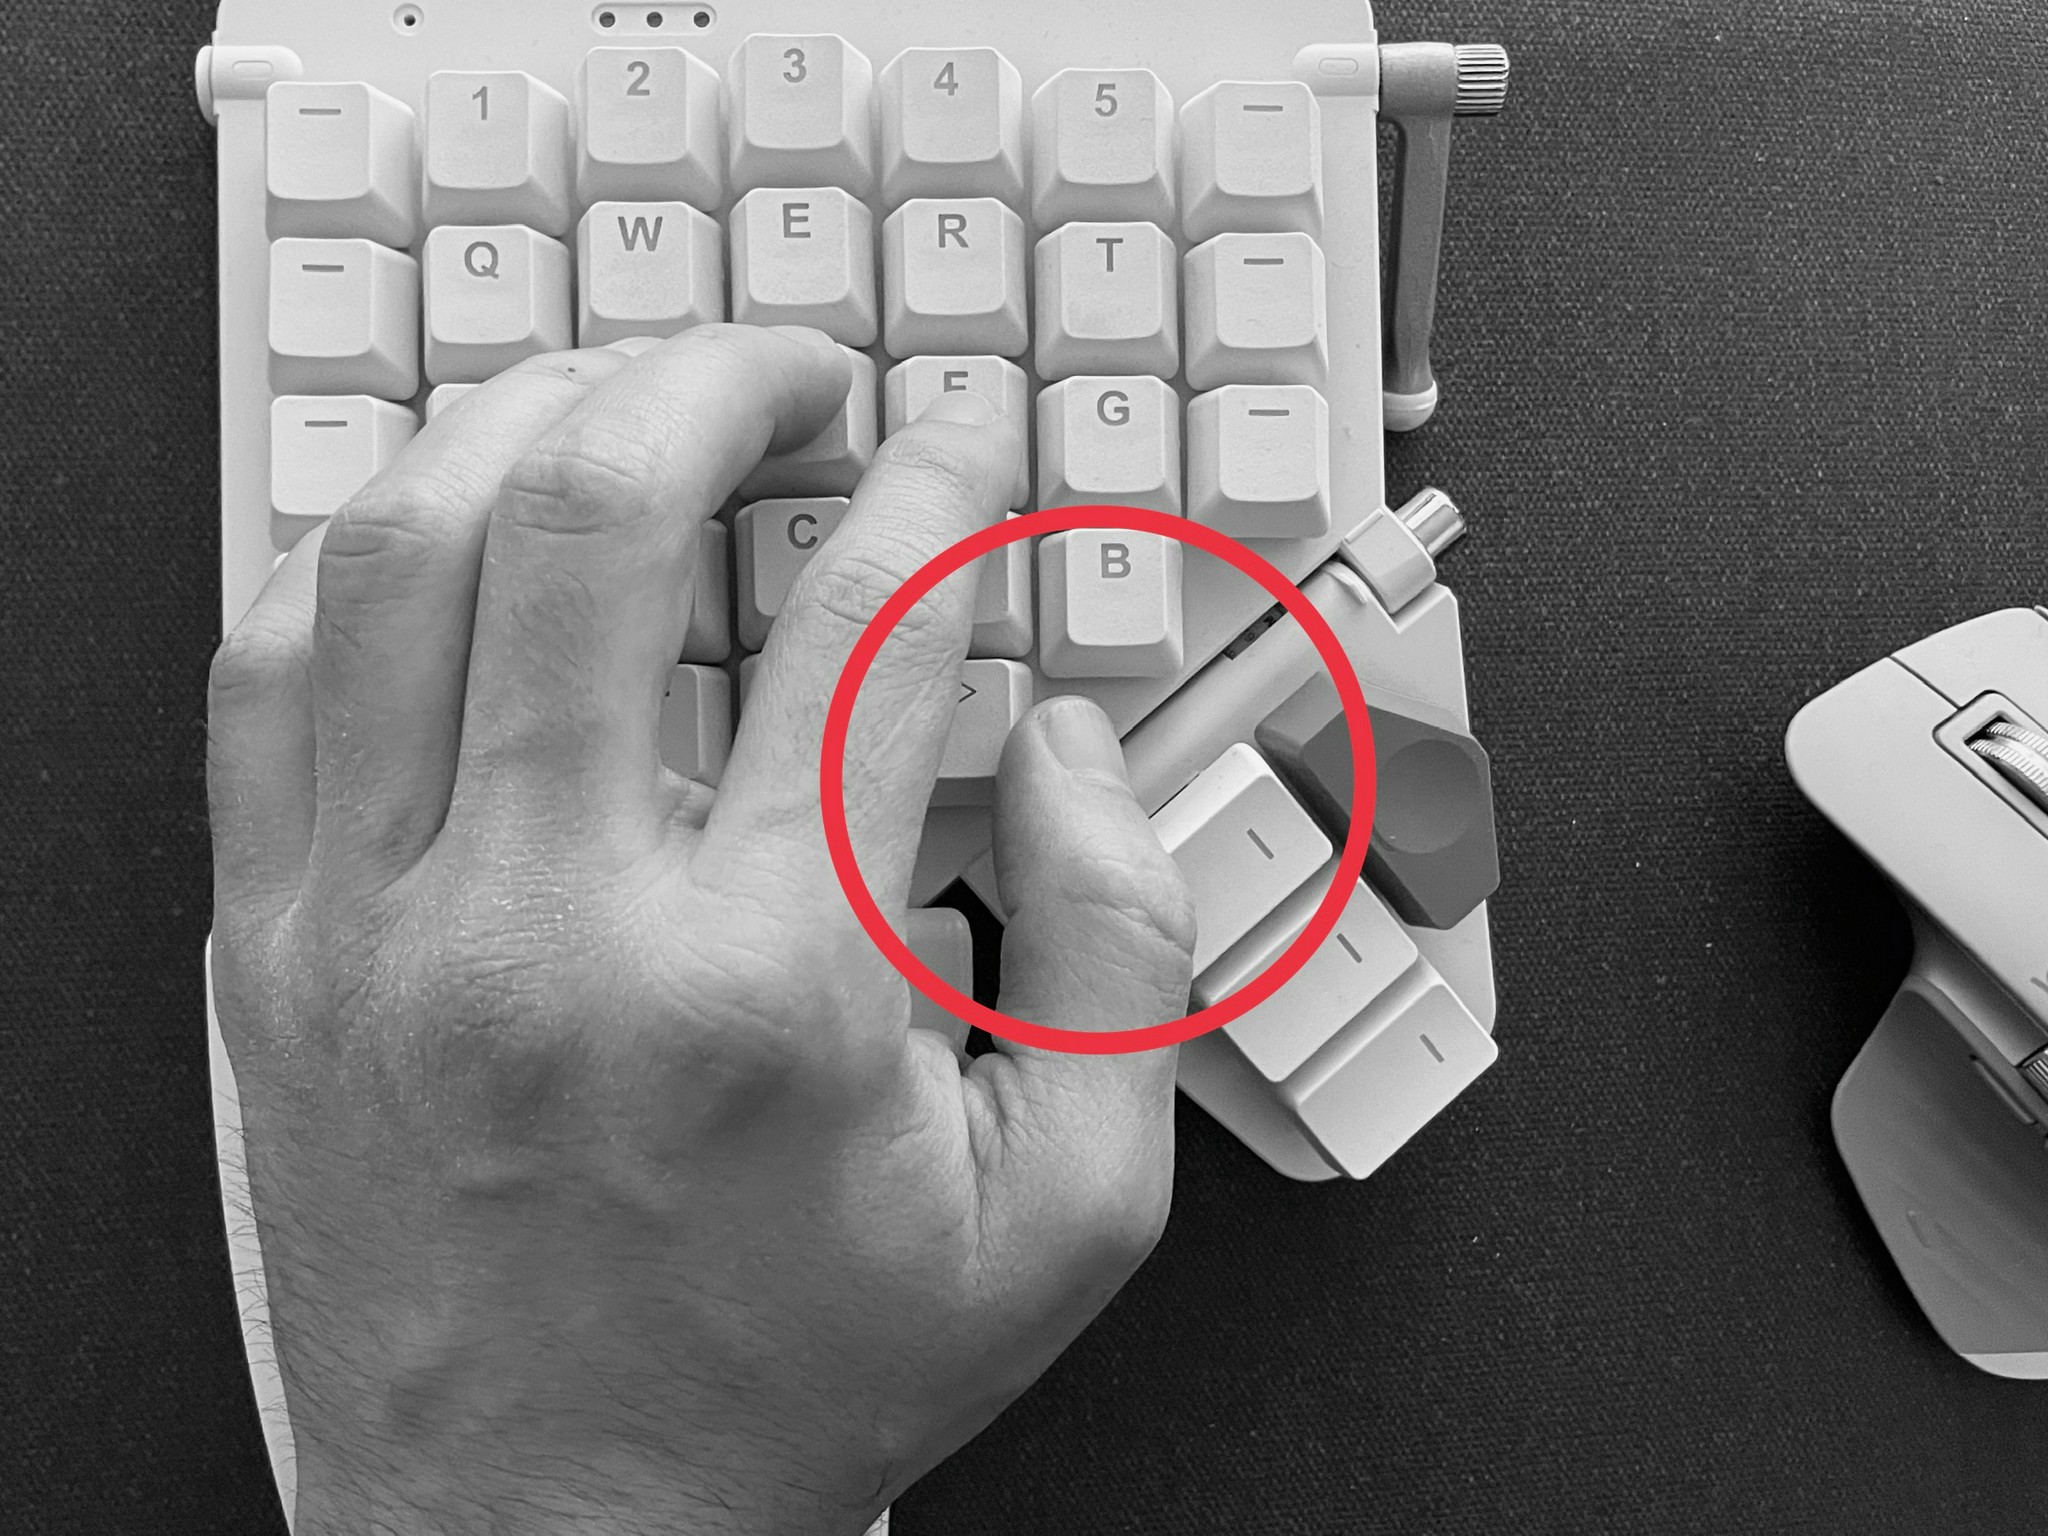 In the natural position of the arm, the thumb rests in between the keys